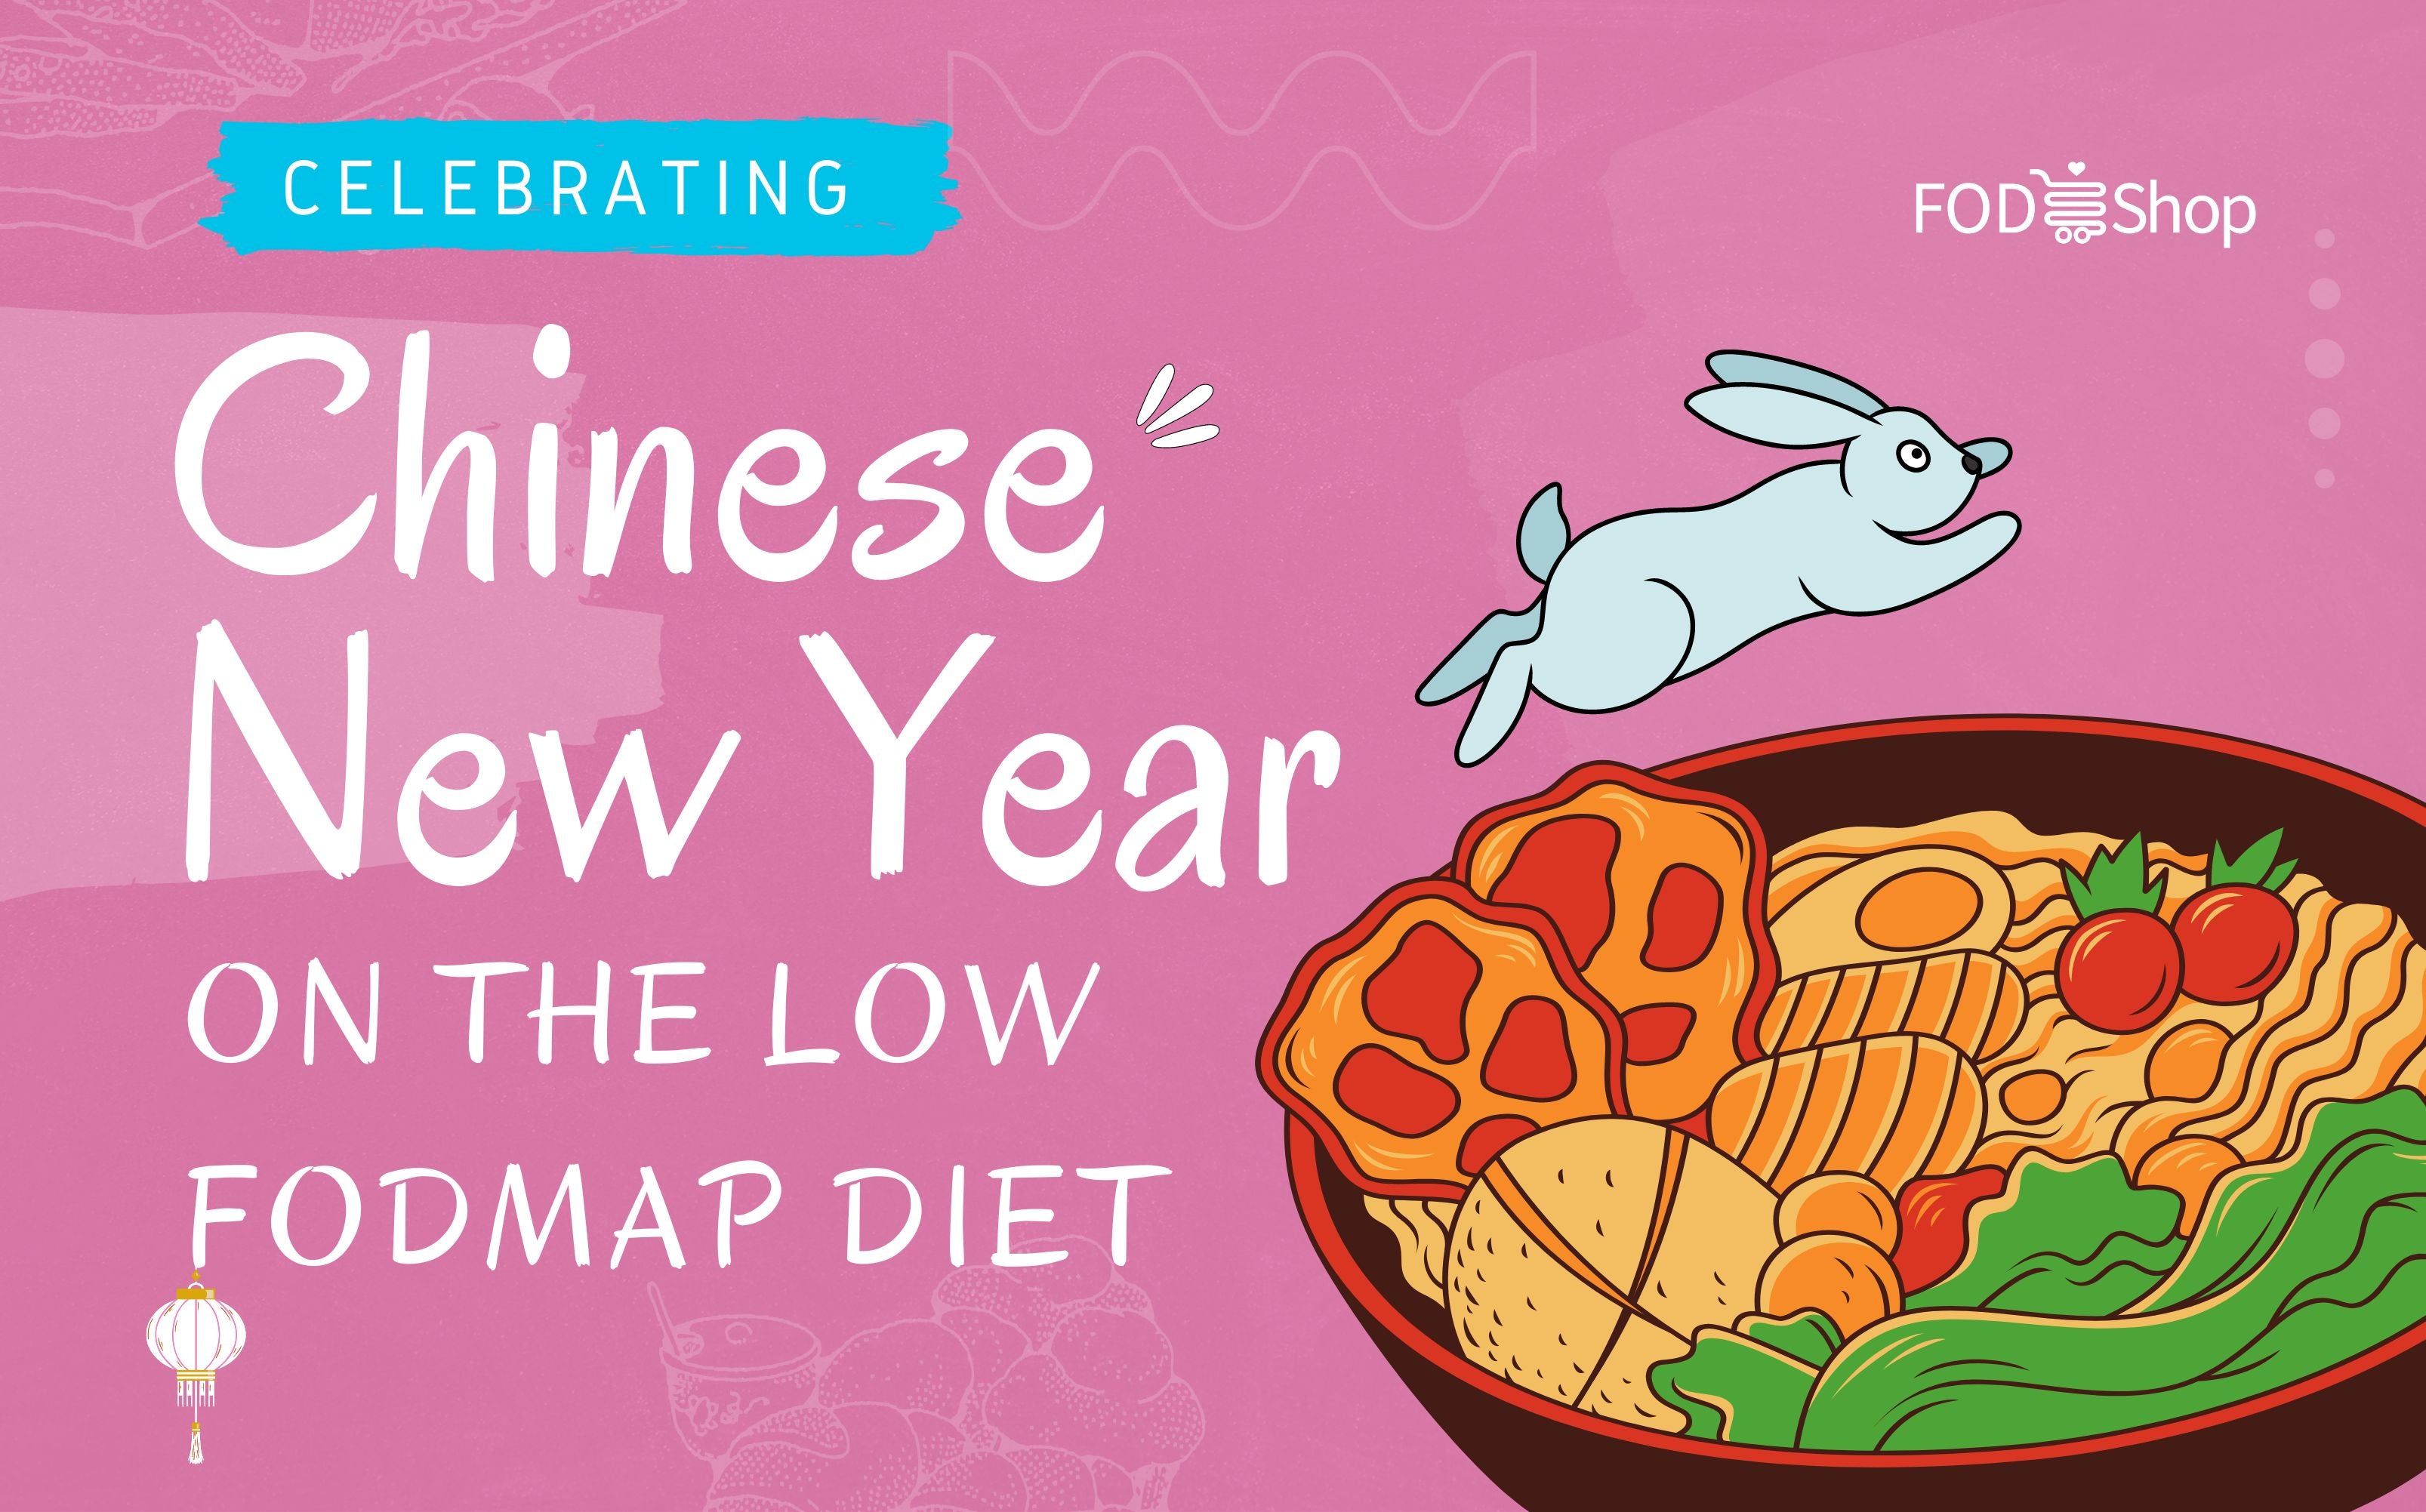 Celebrating Chinese New Year on the Low FODMAP Diet